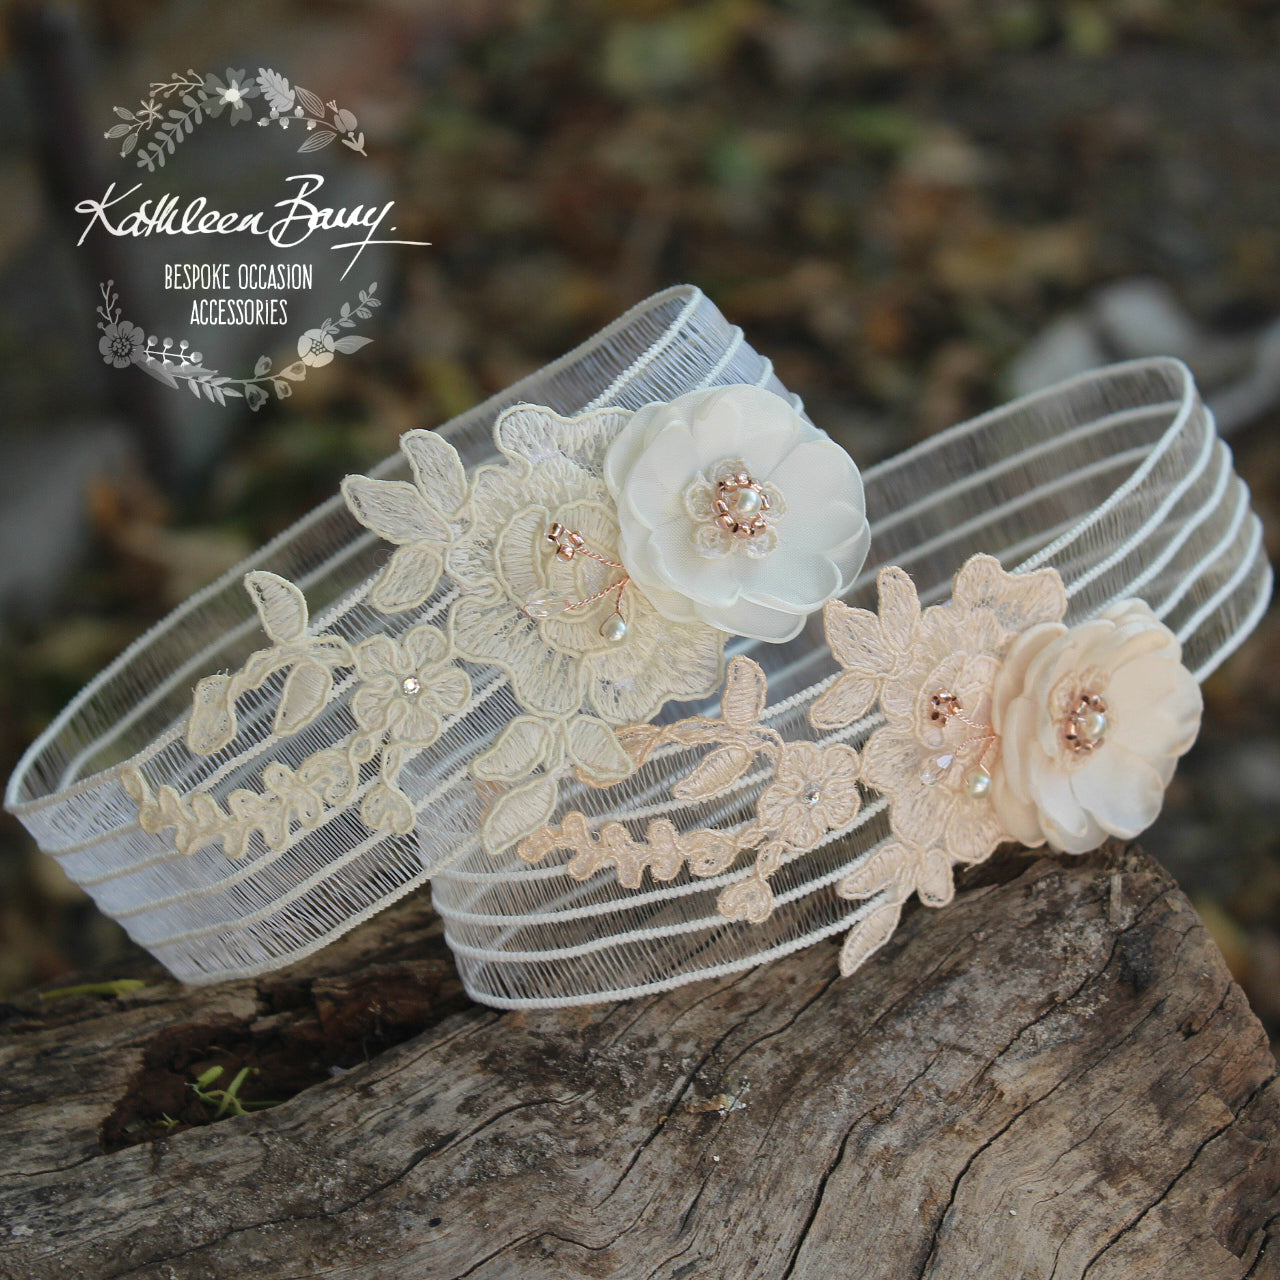 Kelly Garter flower detail and bridal lace Rose gold and blush pink - color options available